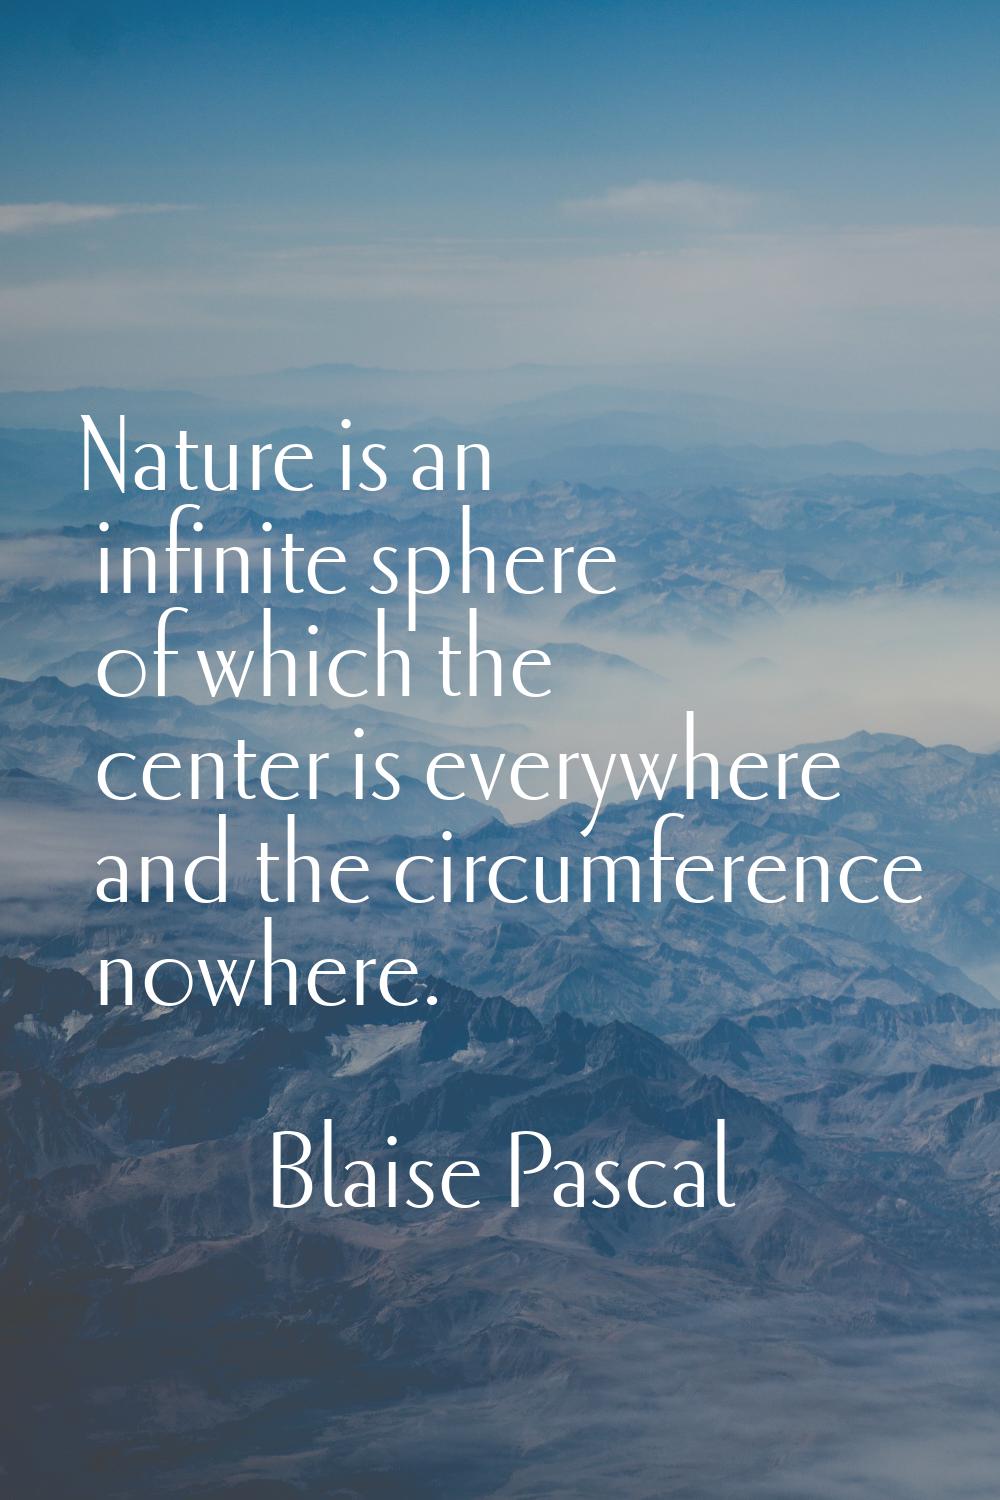 Nature is an infinite sphere of which the center is everywhere and the circumference nowhere.